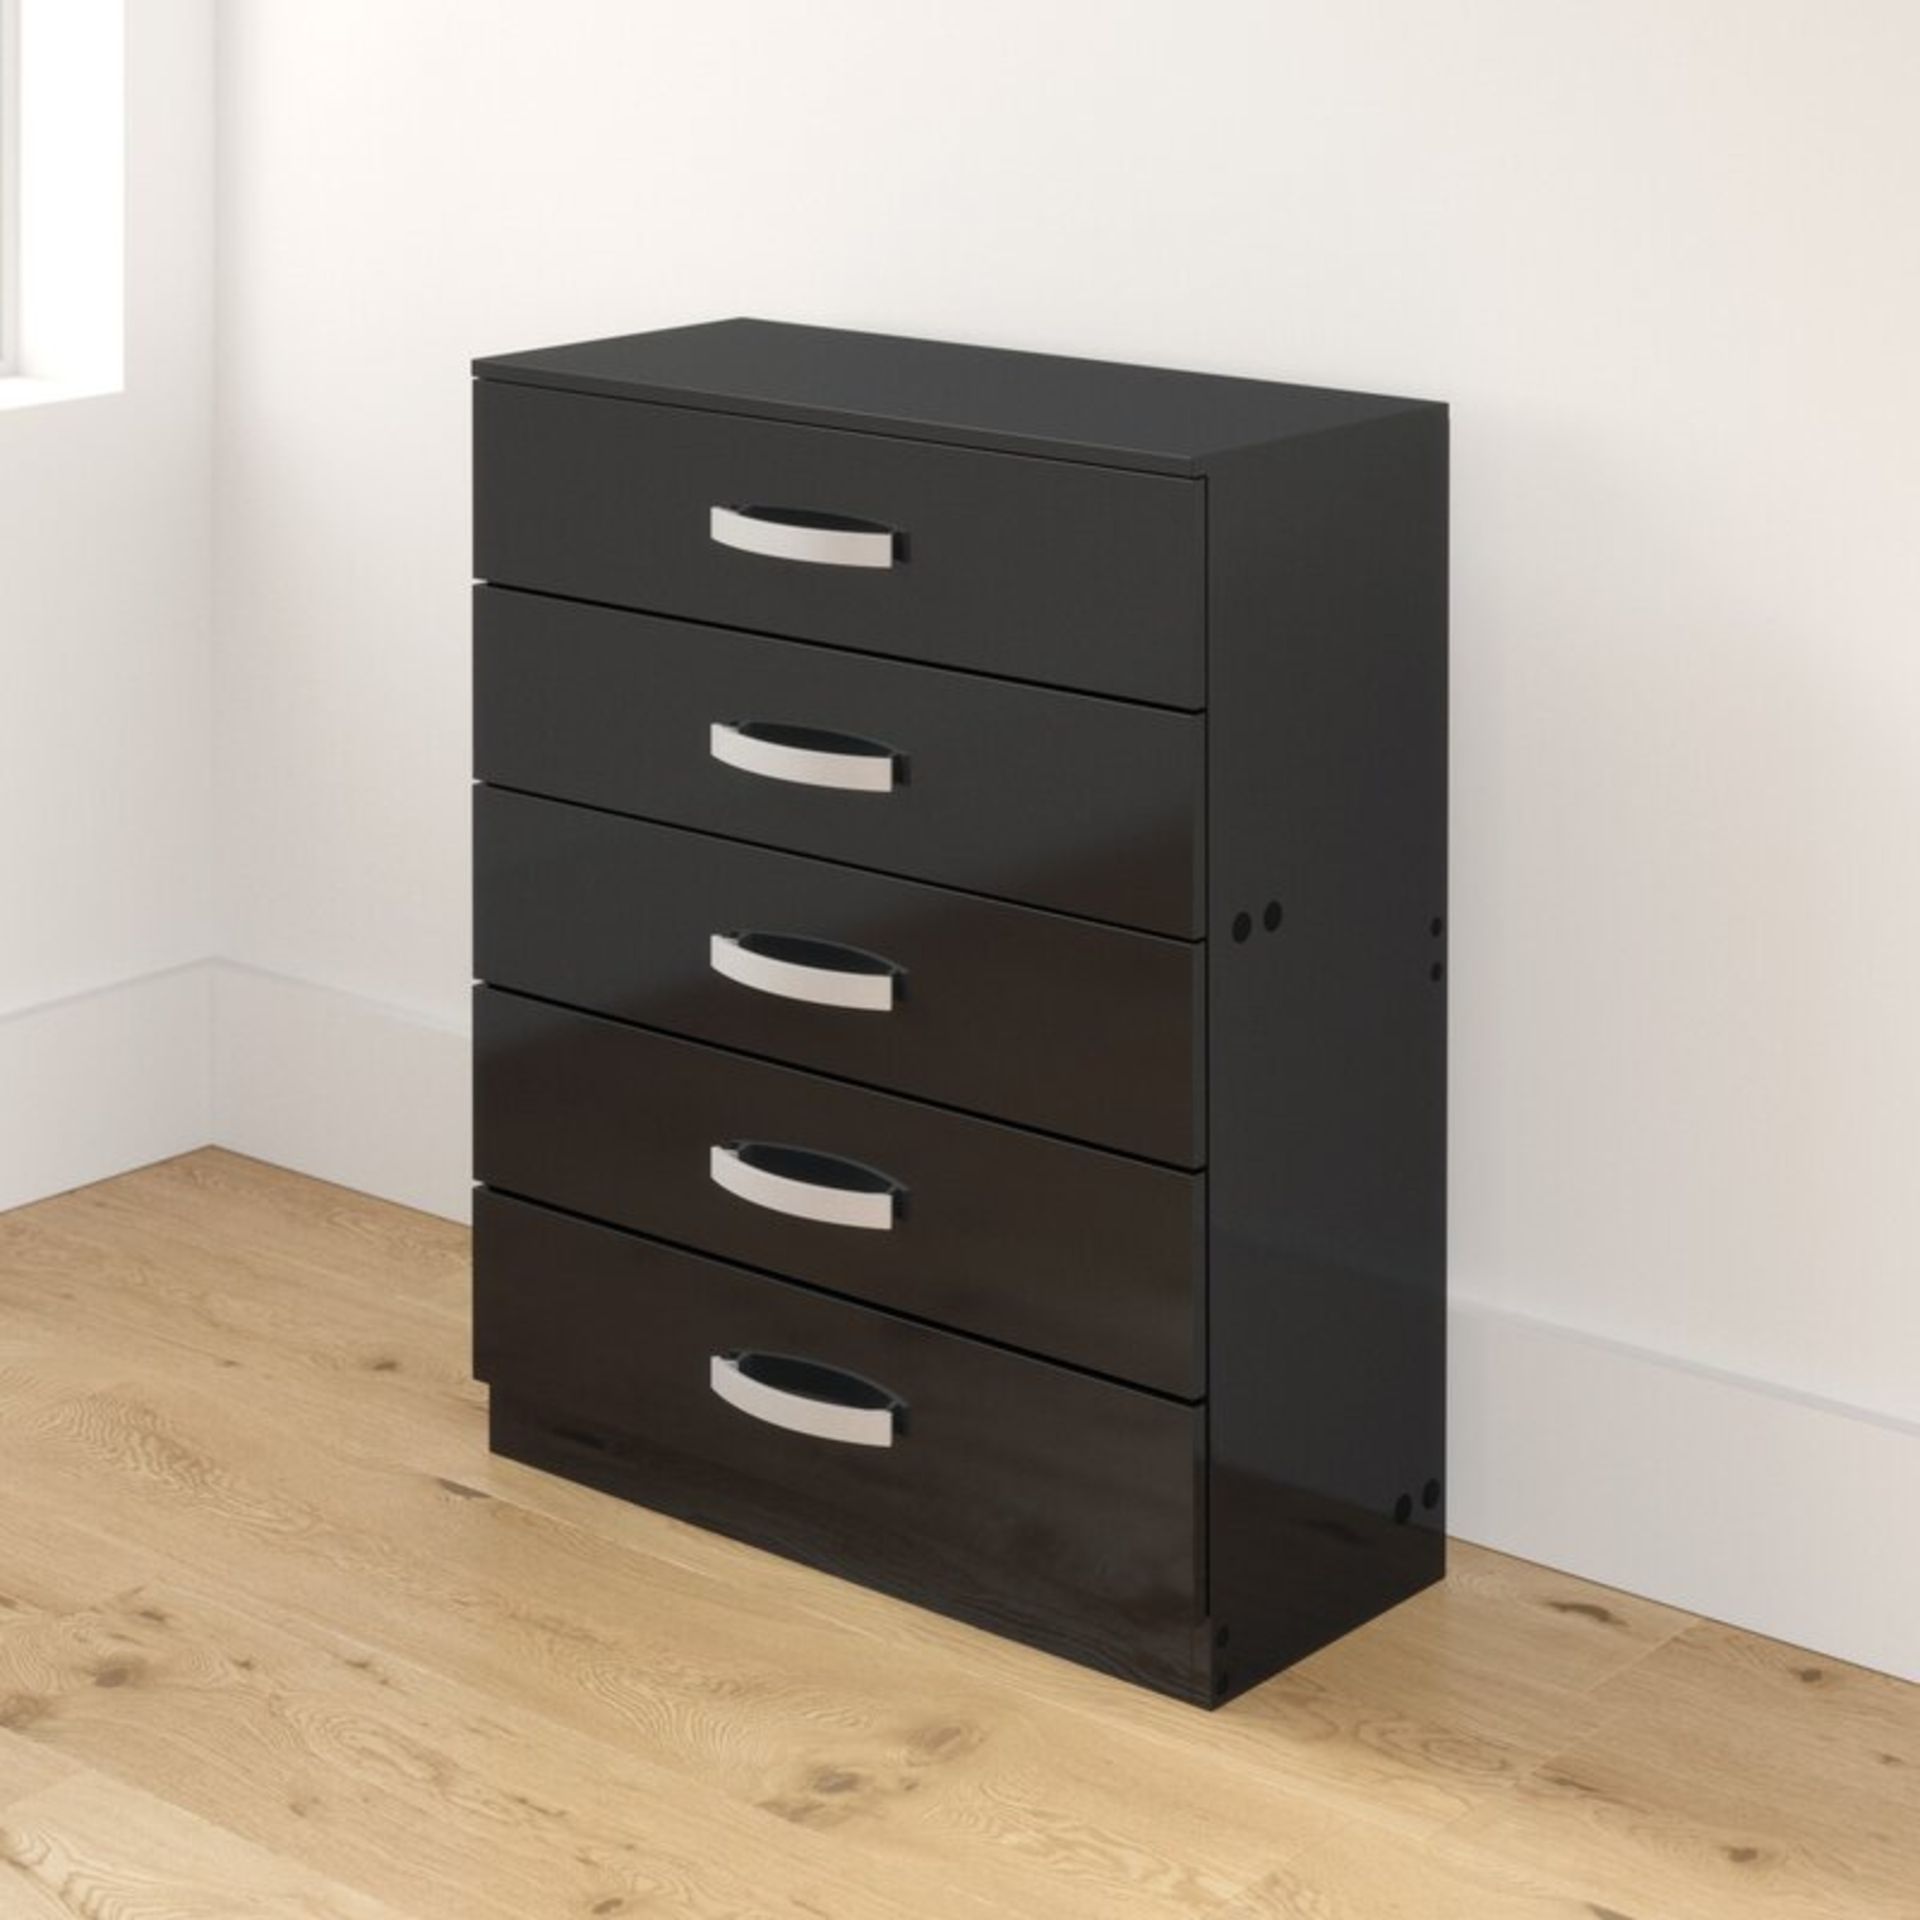 Joselyn 5 Drawer Chest - RRP £123.99 - Image 2 of 2